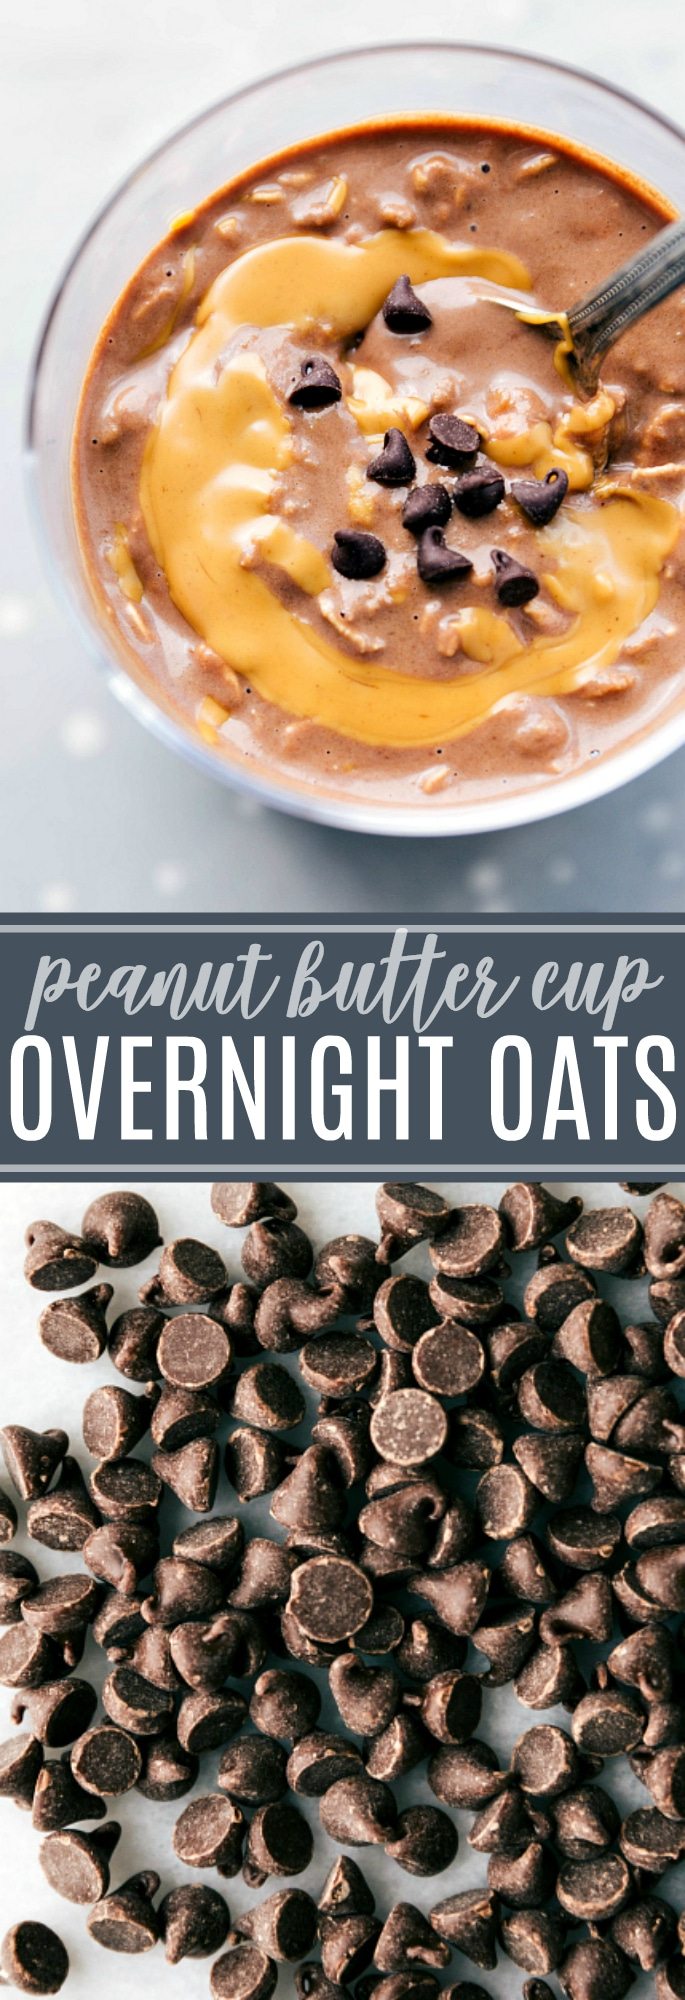 THE BEST OVERNIGHT OATS -- PEANUT BUTTER CUP FLAVORED | chelseasmessyapron.com